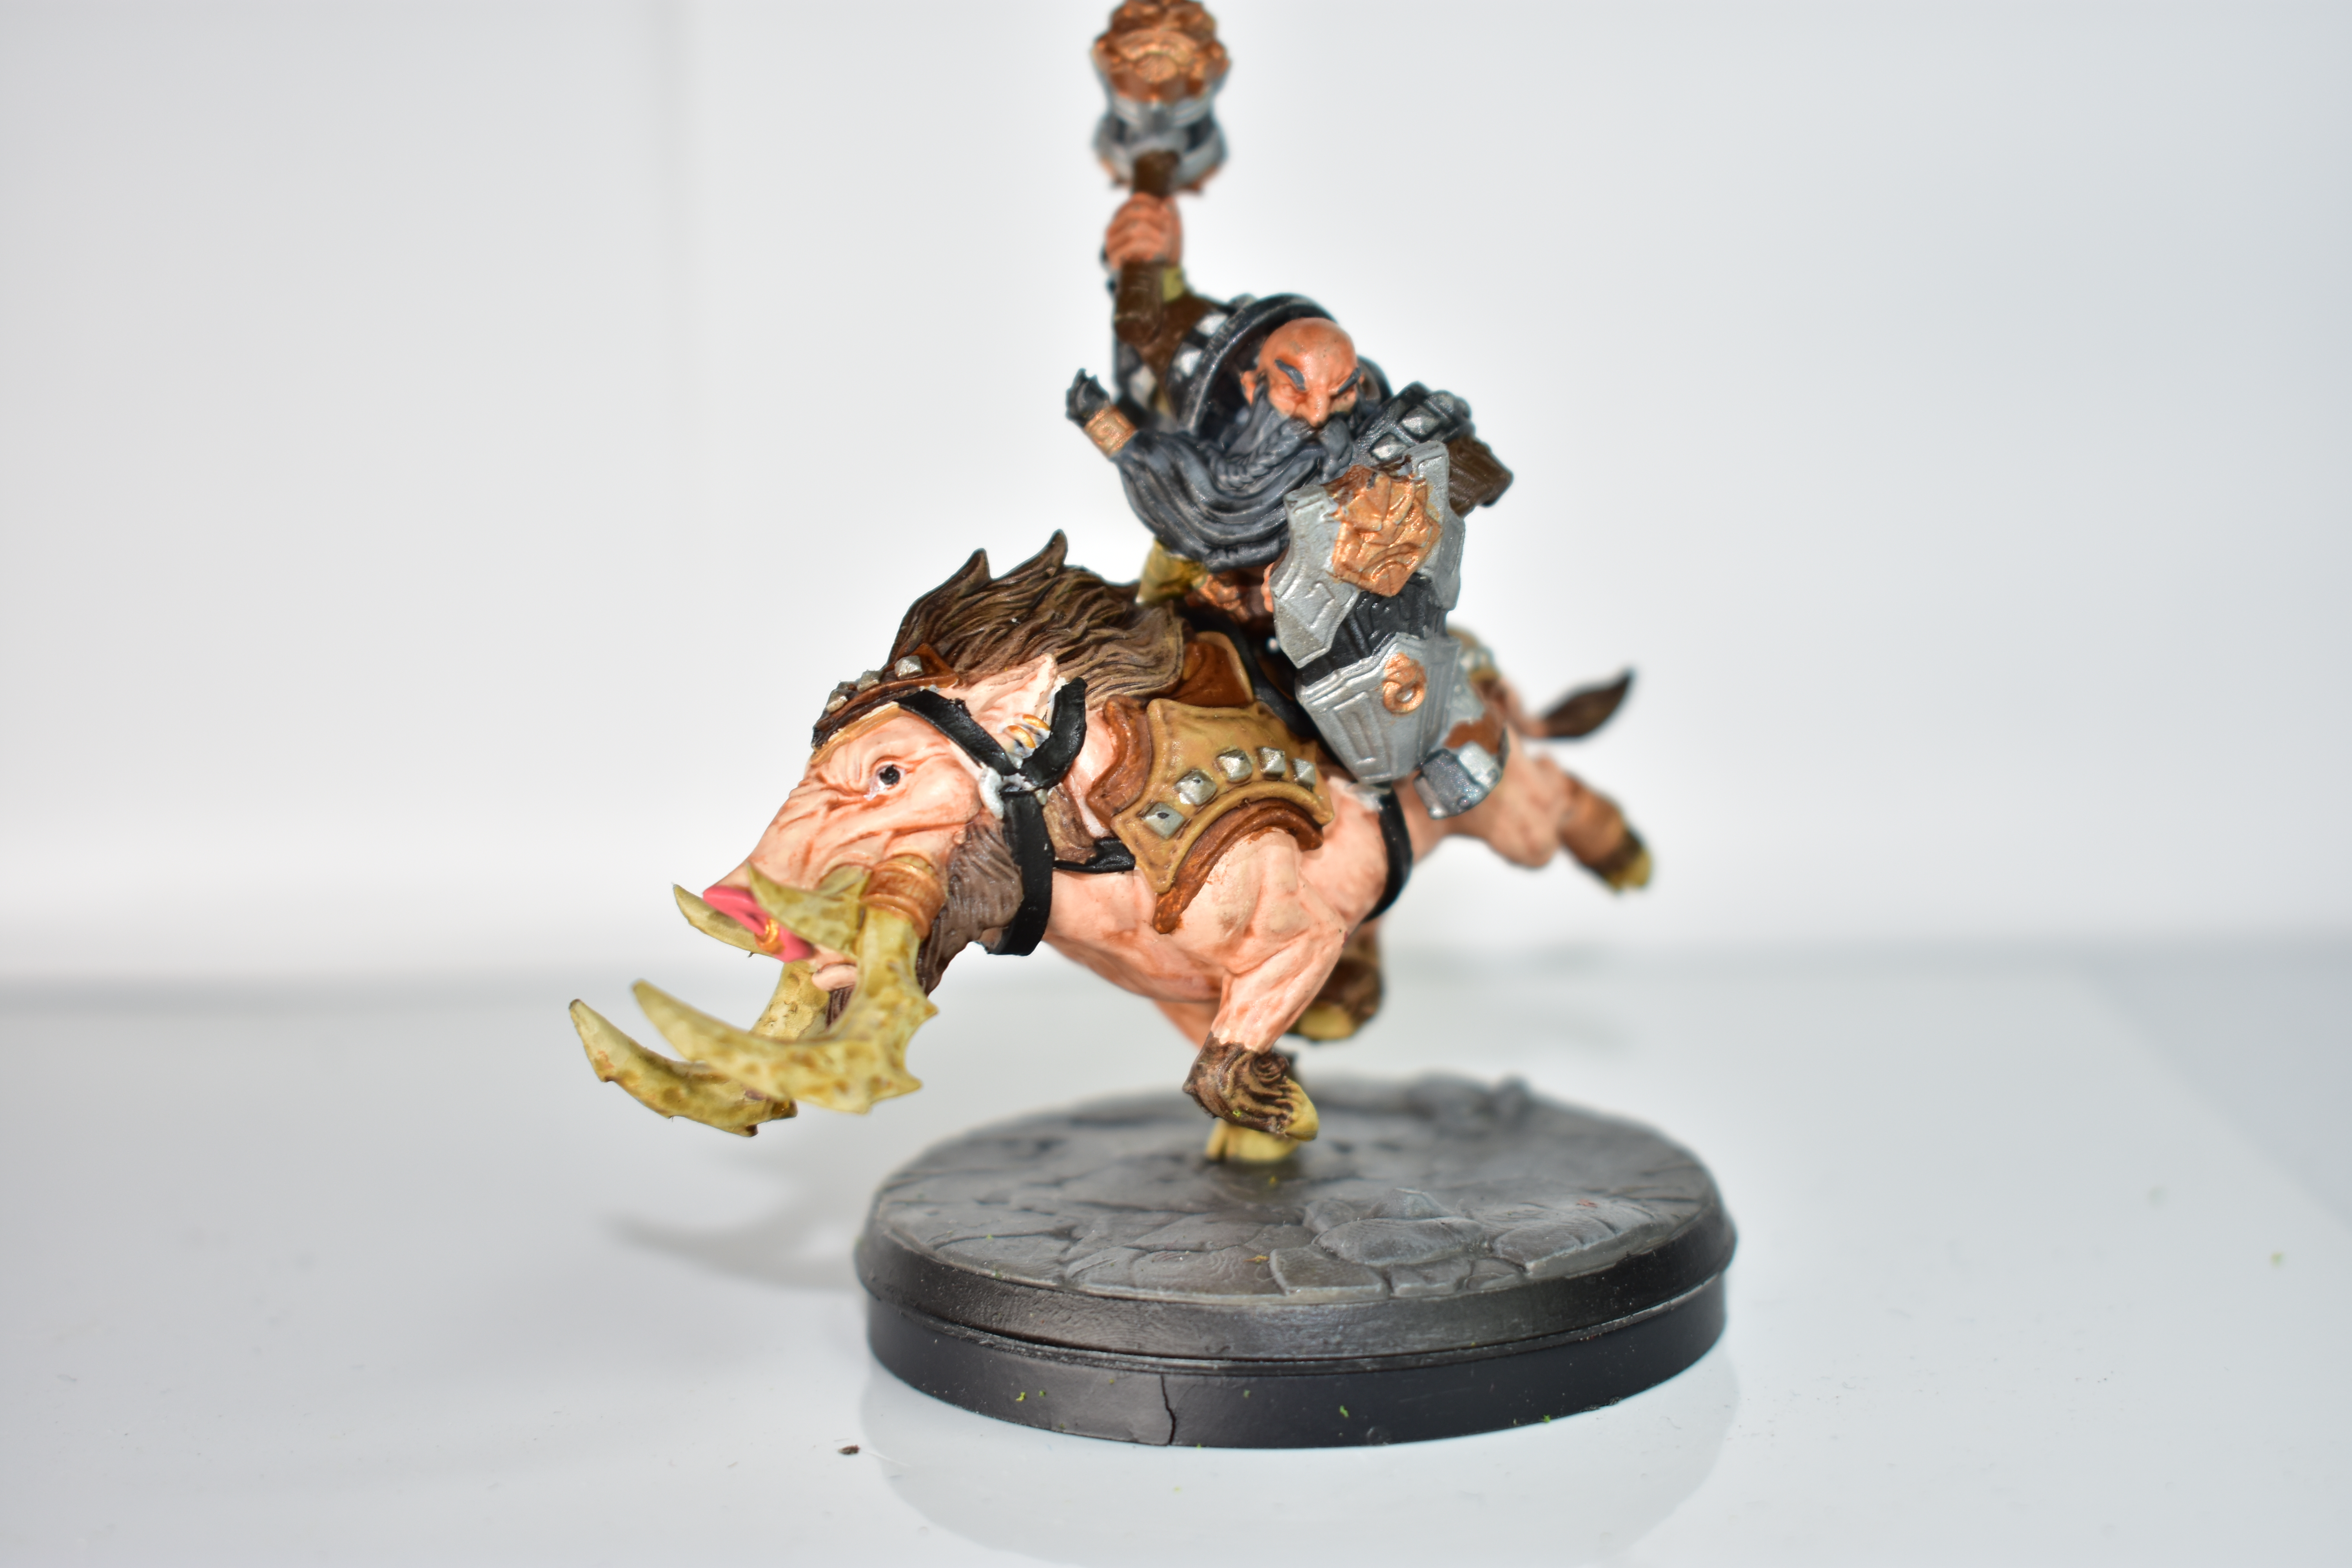 Helga on Wulf-Hog 28mm Dungeons and Dragons DnD Mini